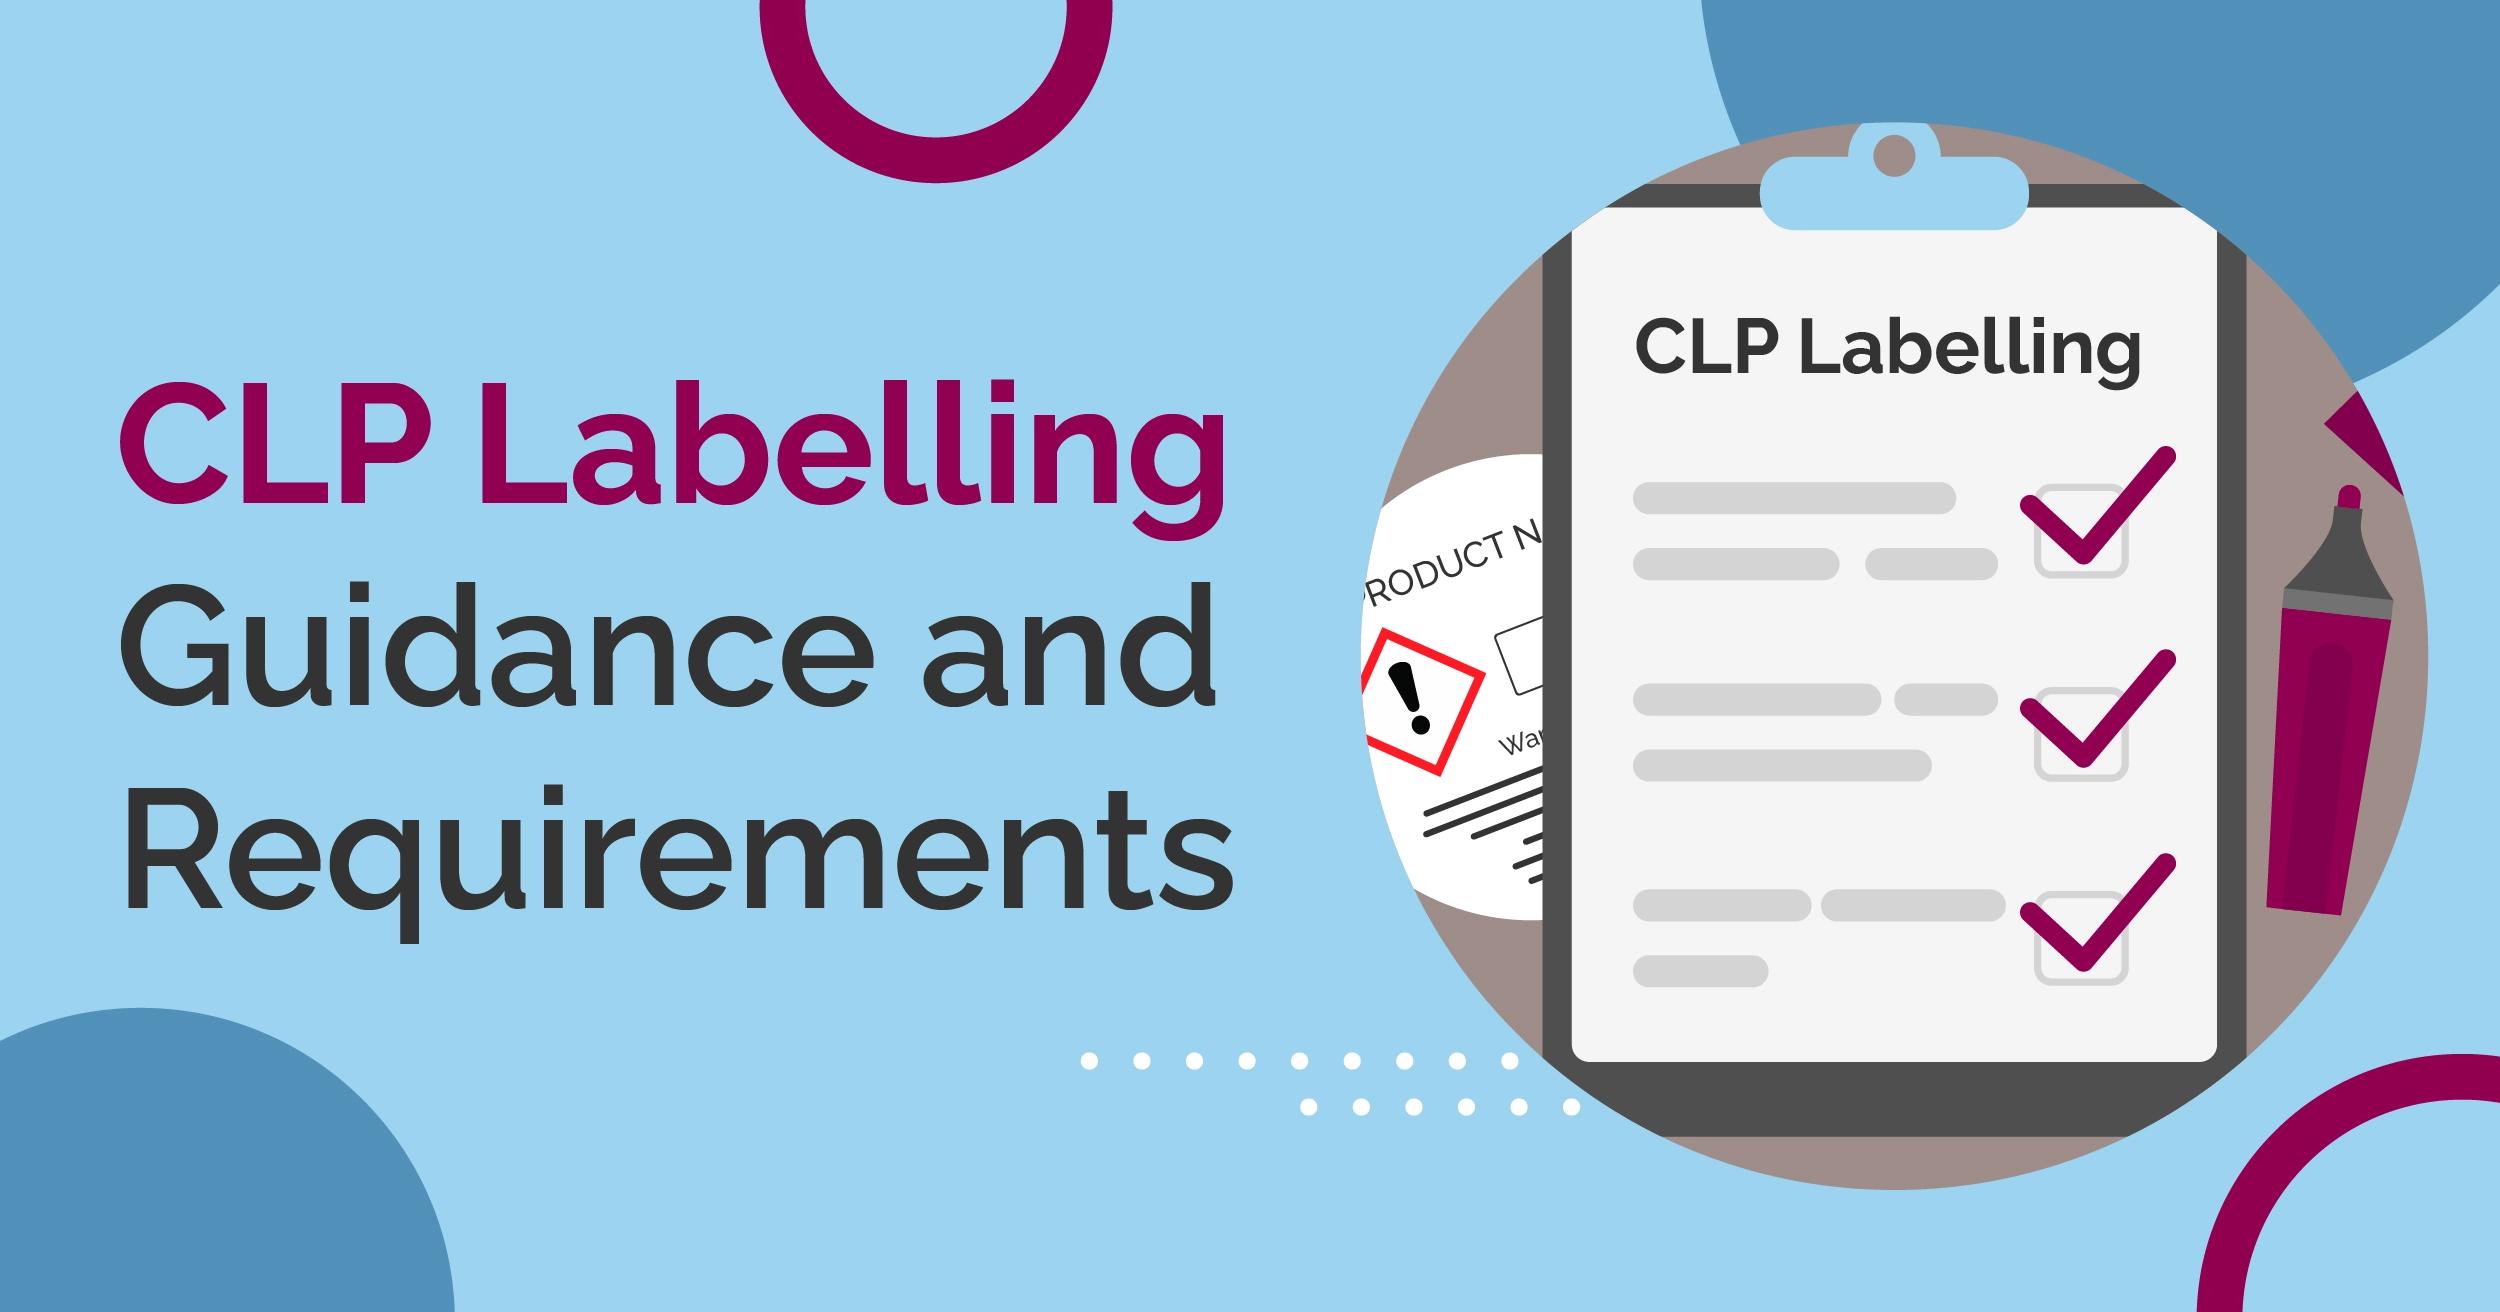 CLP Labelling Guidance and Requirements